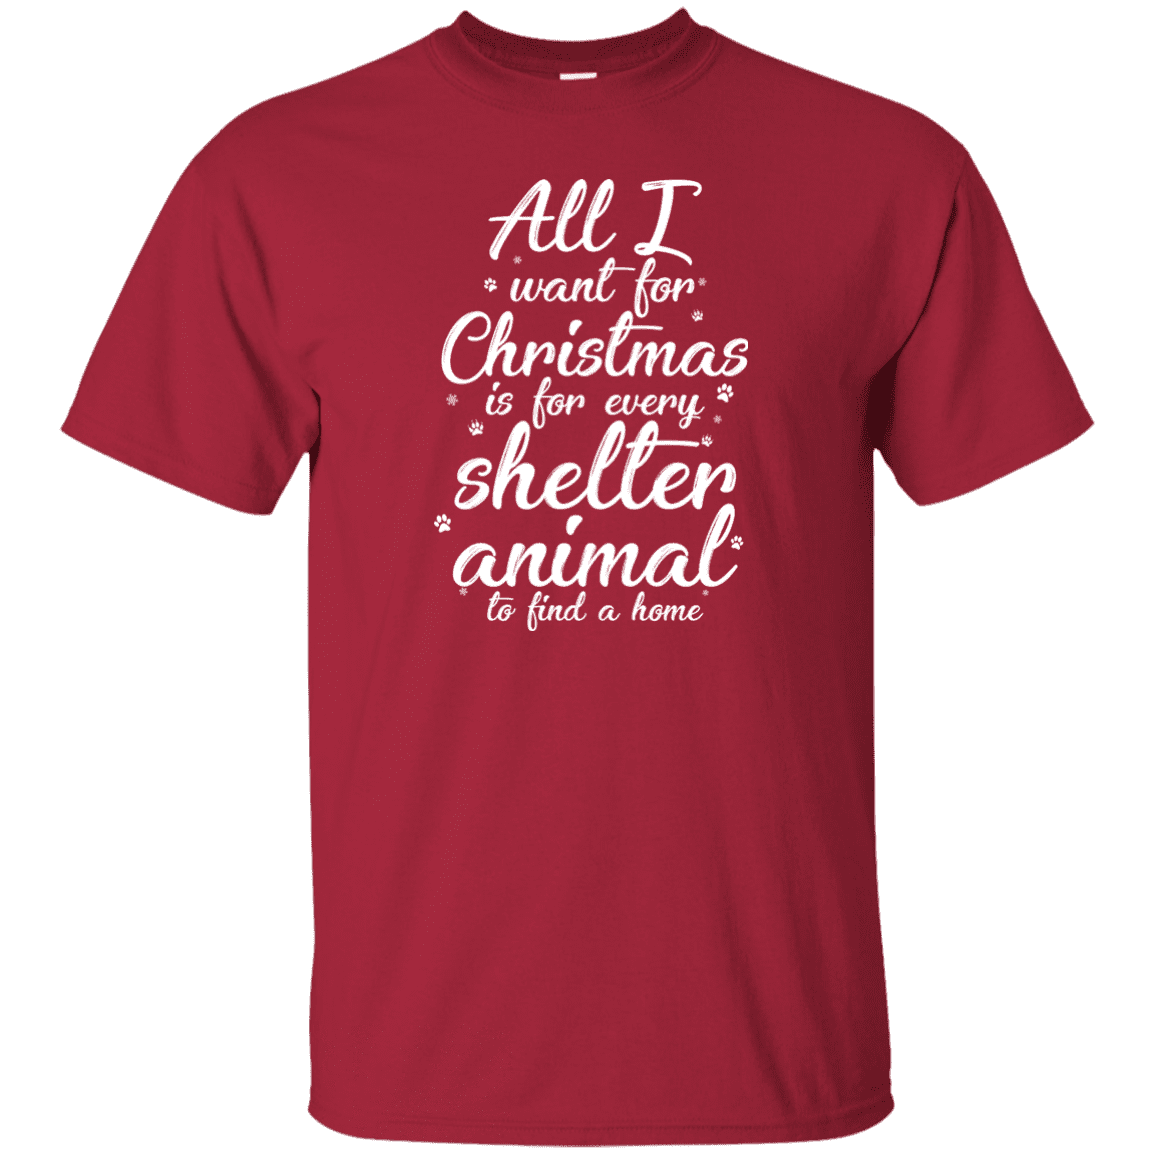 All I Want For Christmas - T Shirt.